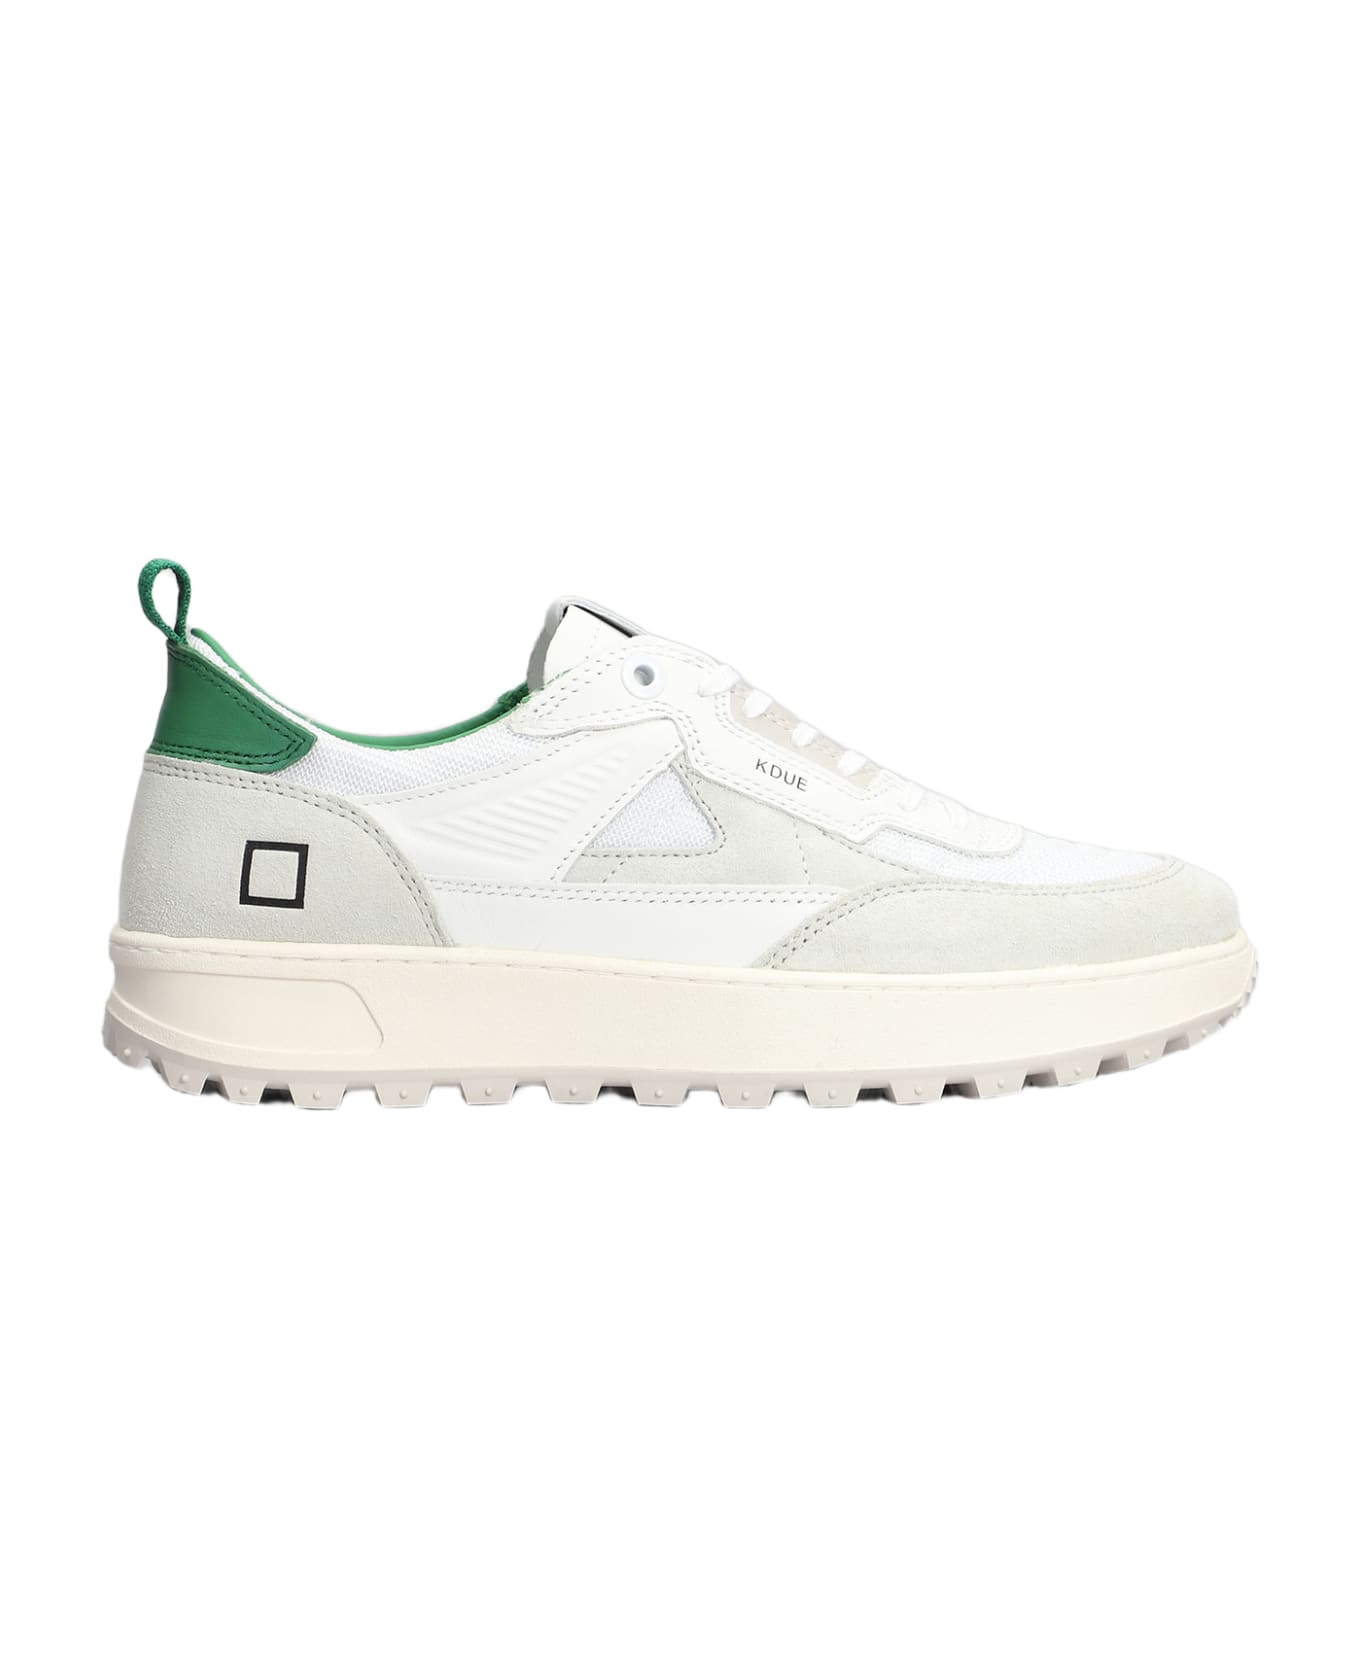 D.A.T.E. Kdue Sneakers In White Suede And Fabric - white スニーカー